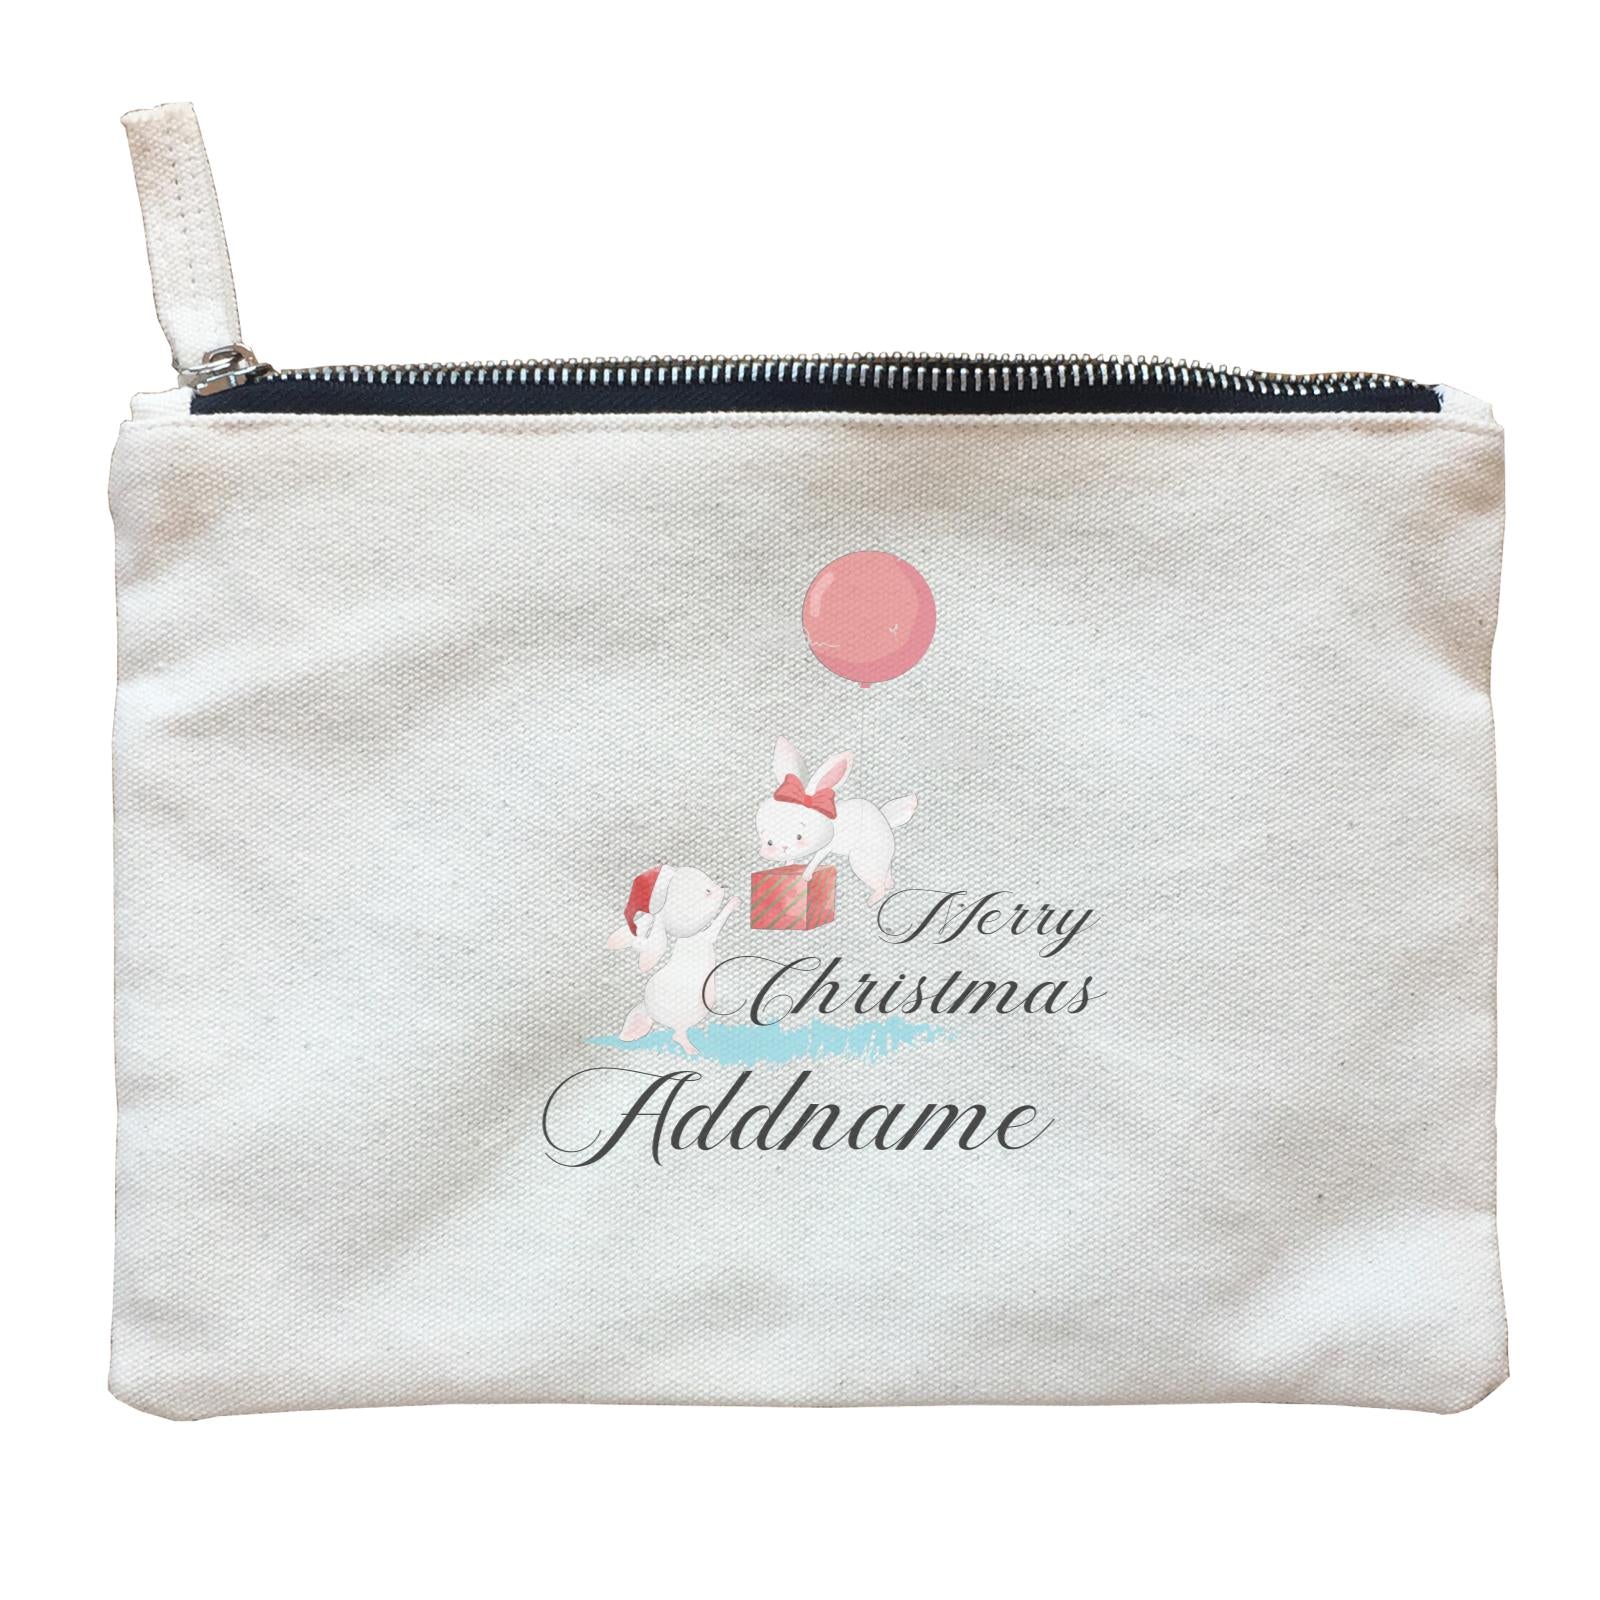 Christmas Cute Rabbits With Balloon Merry Christmas Addname Zipper Pouch